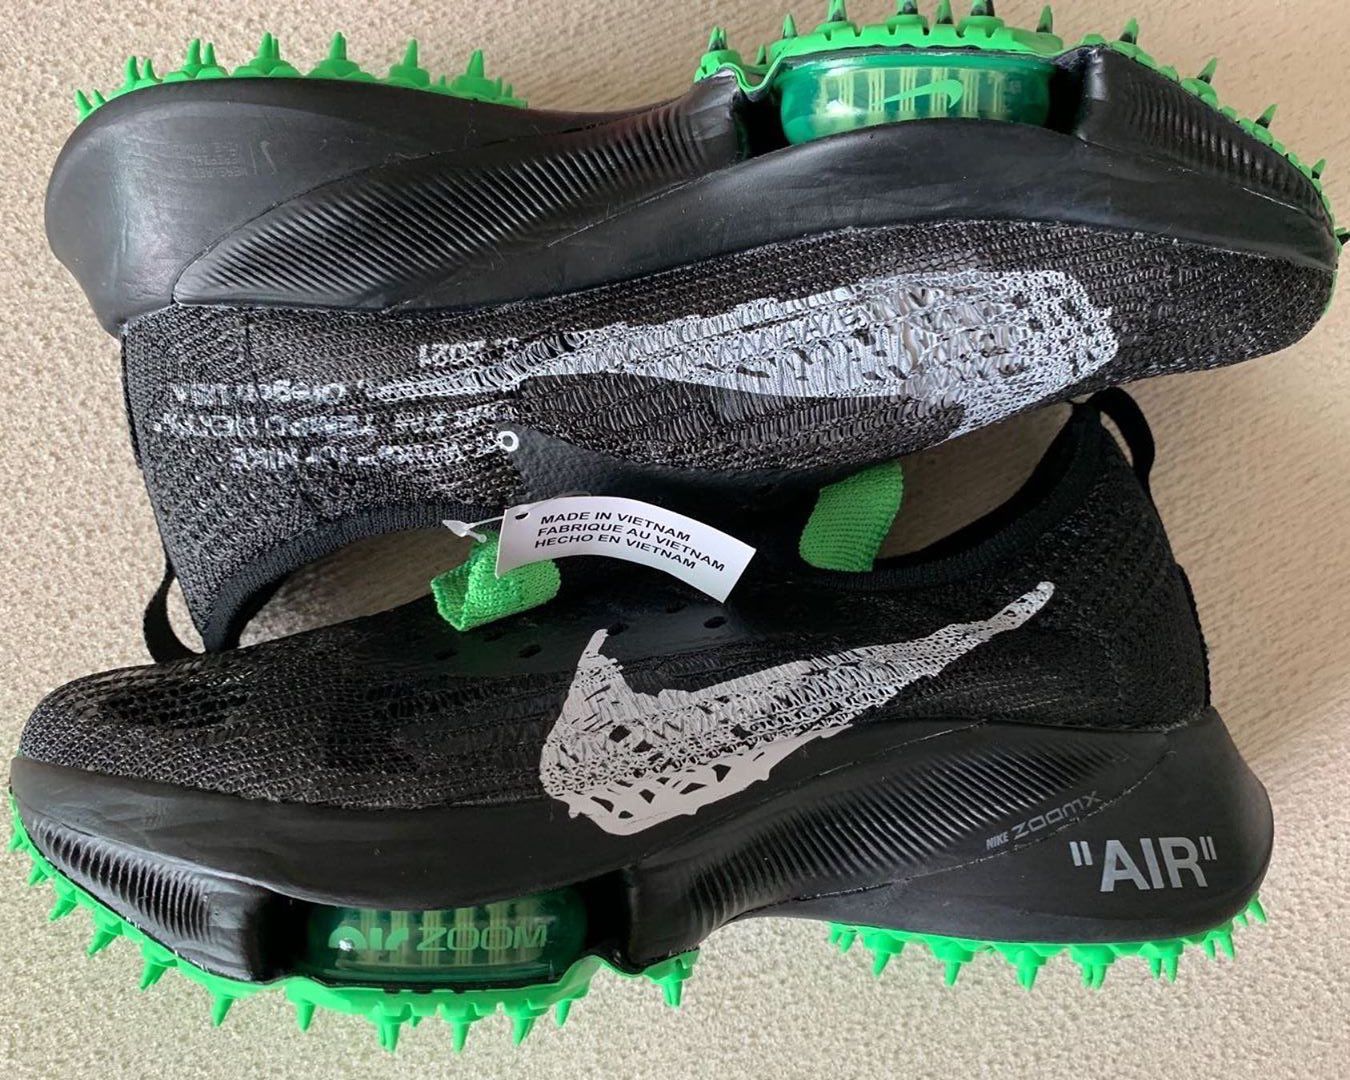 The Off-White x Nike Air Zoom Tempo NEXT% is Spine-Tingling 